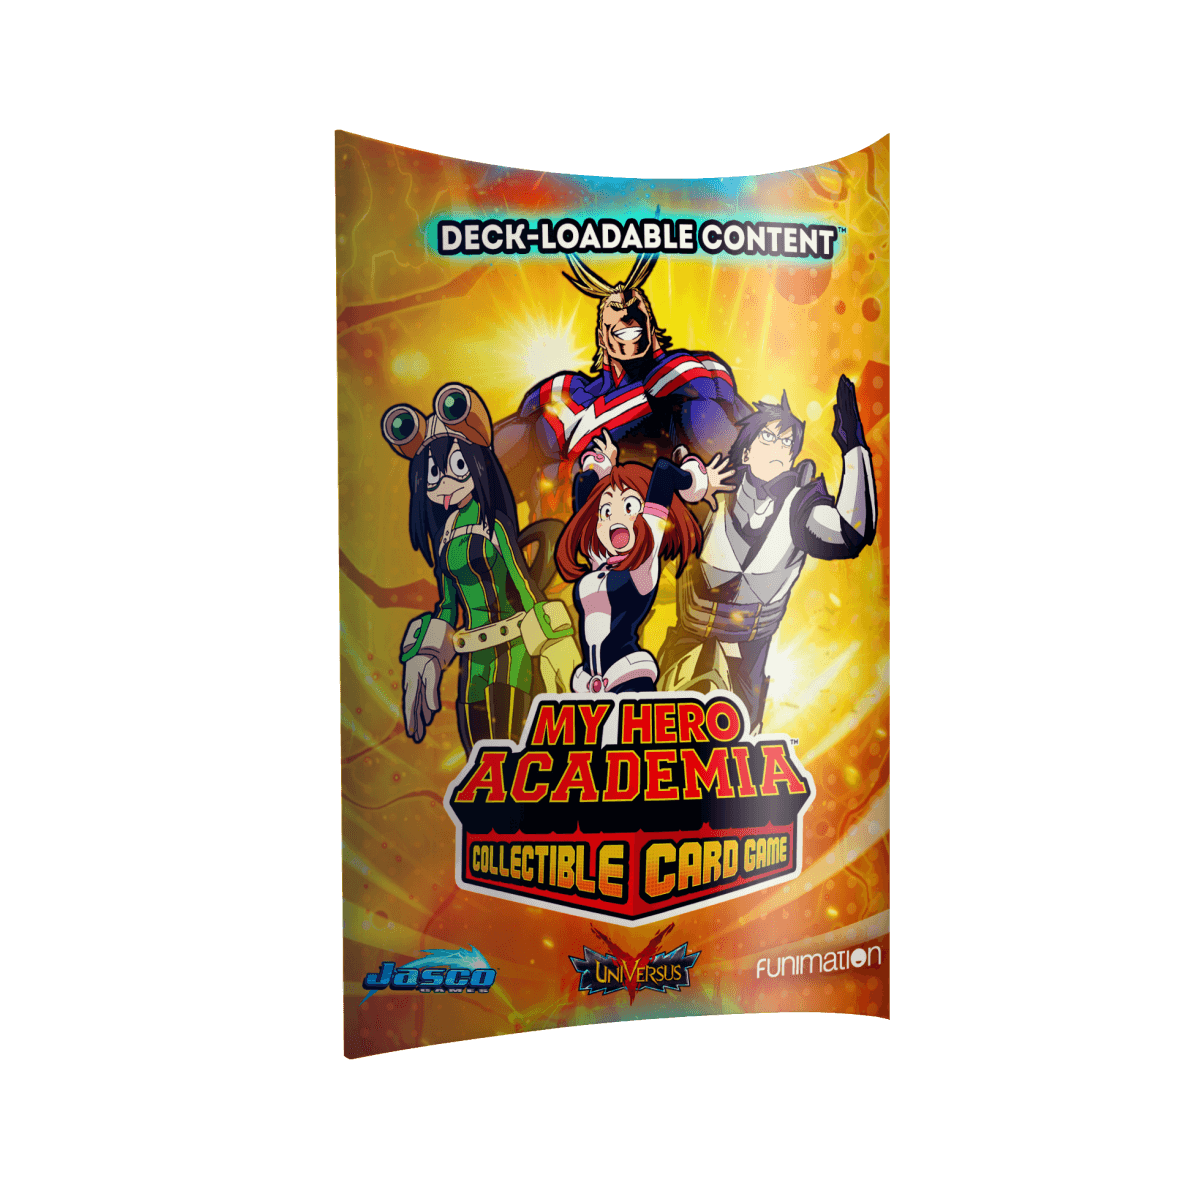 My Hero Academia Collectible Card Game Deck-Loadable Content (Unlimited Printing)